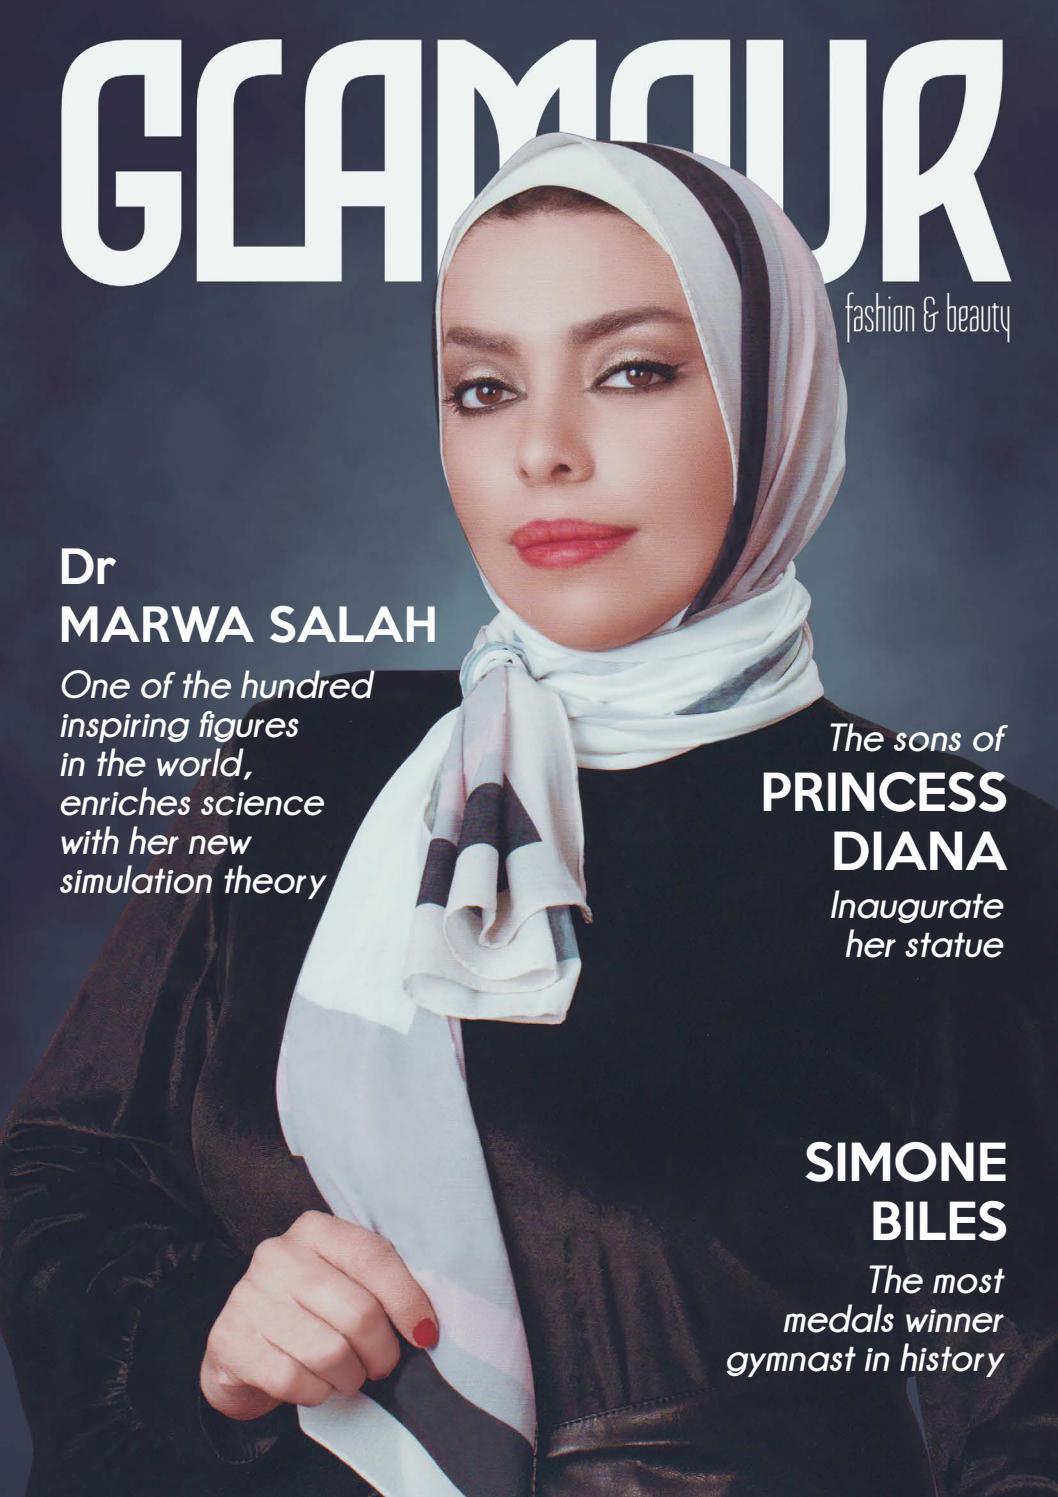 GLAMOUR fashion and beauty, September 2021